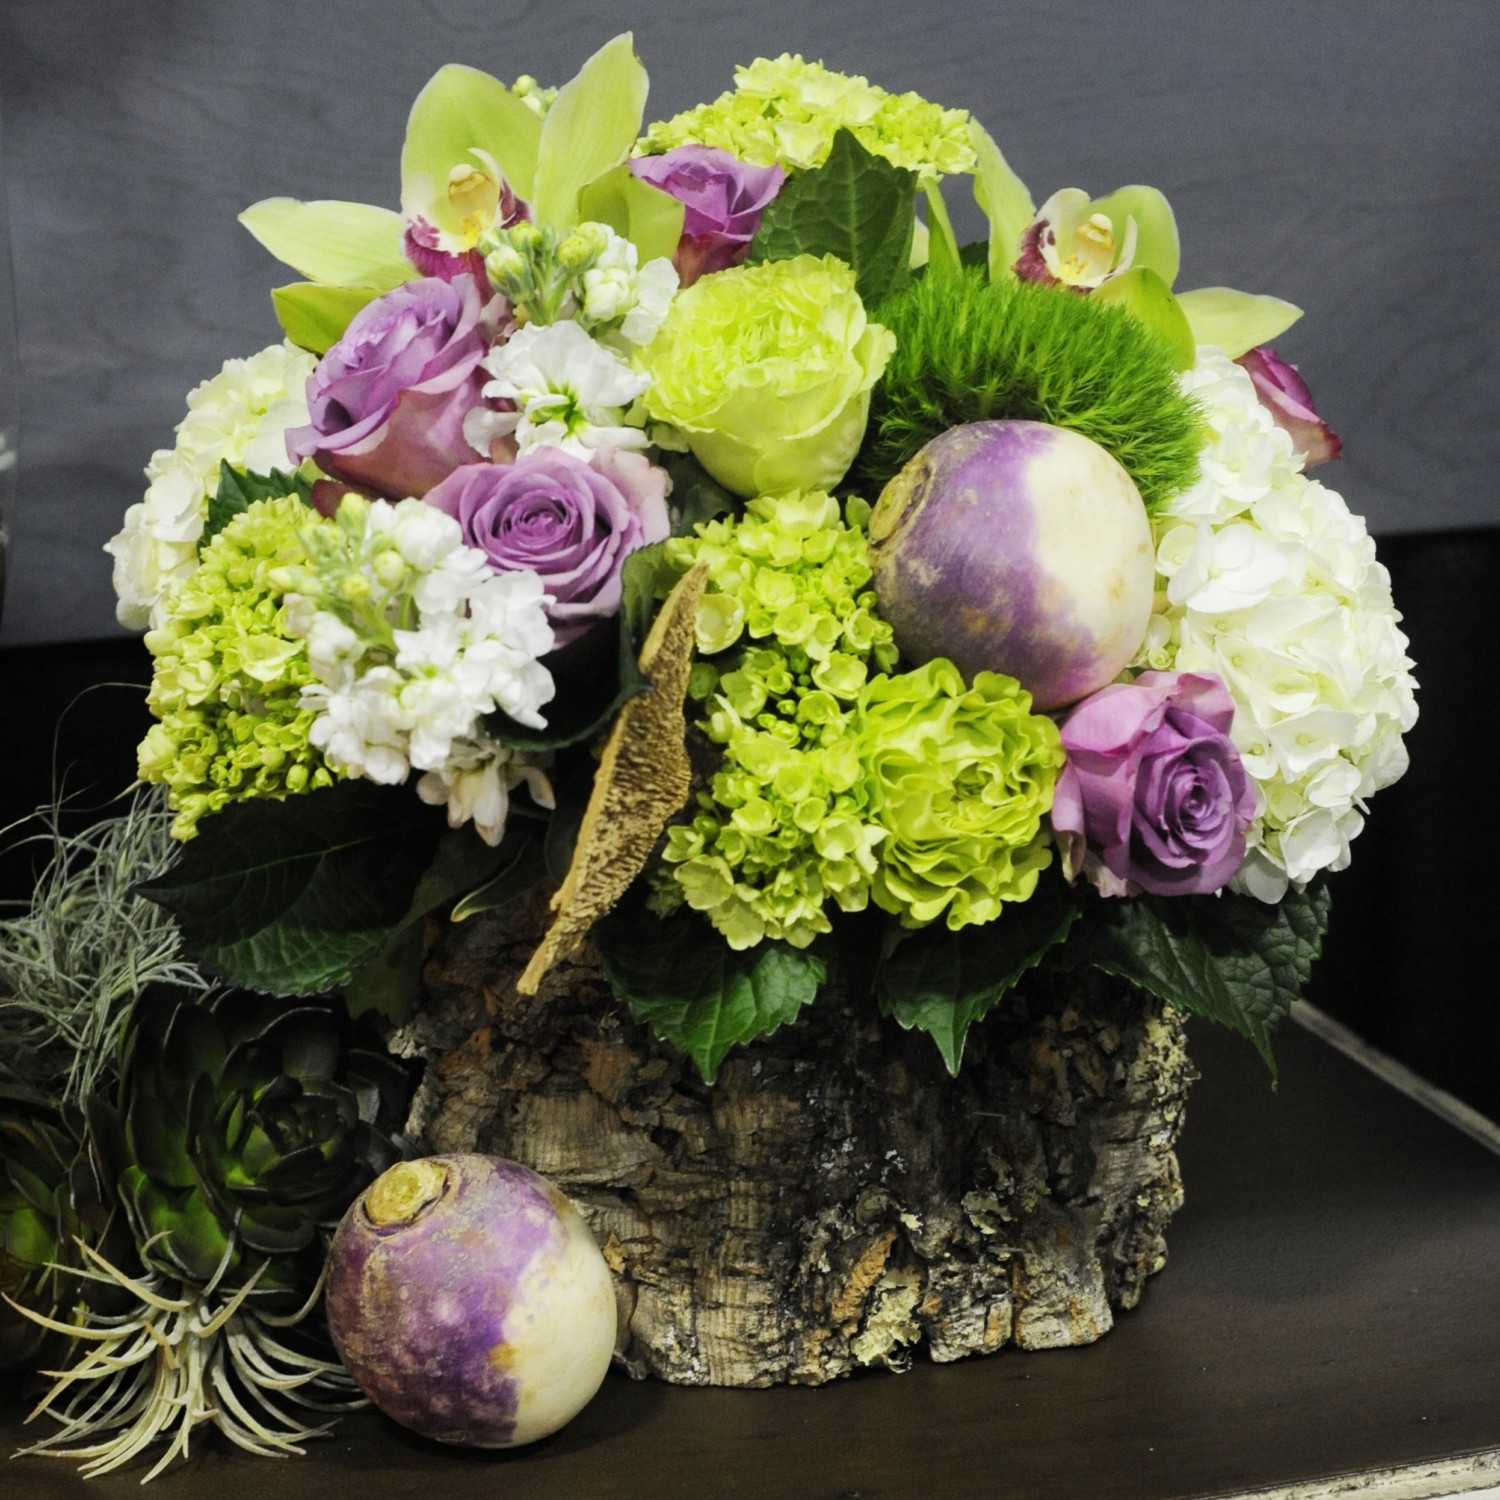 A cork container holds an arrangement of hydrangeas, ‘Cool Water’ and ‘Super Green’ roses, ‘Green Trick’ dianthus, white stock, cymbidium orchids, and turnips at Cachepot in Knoxville, Tennessee.